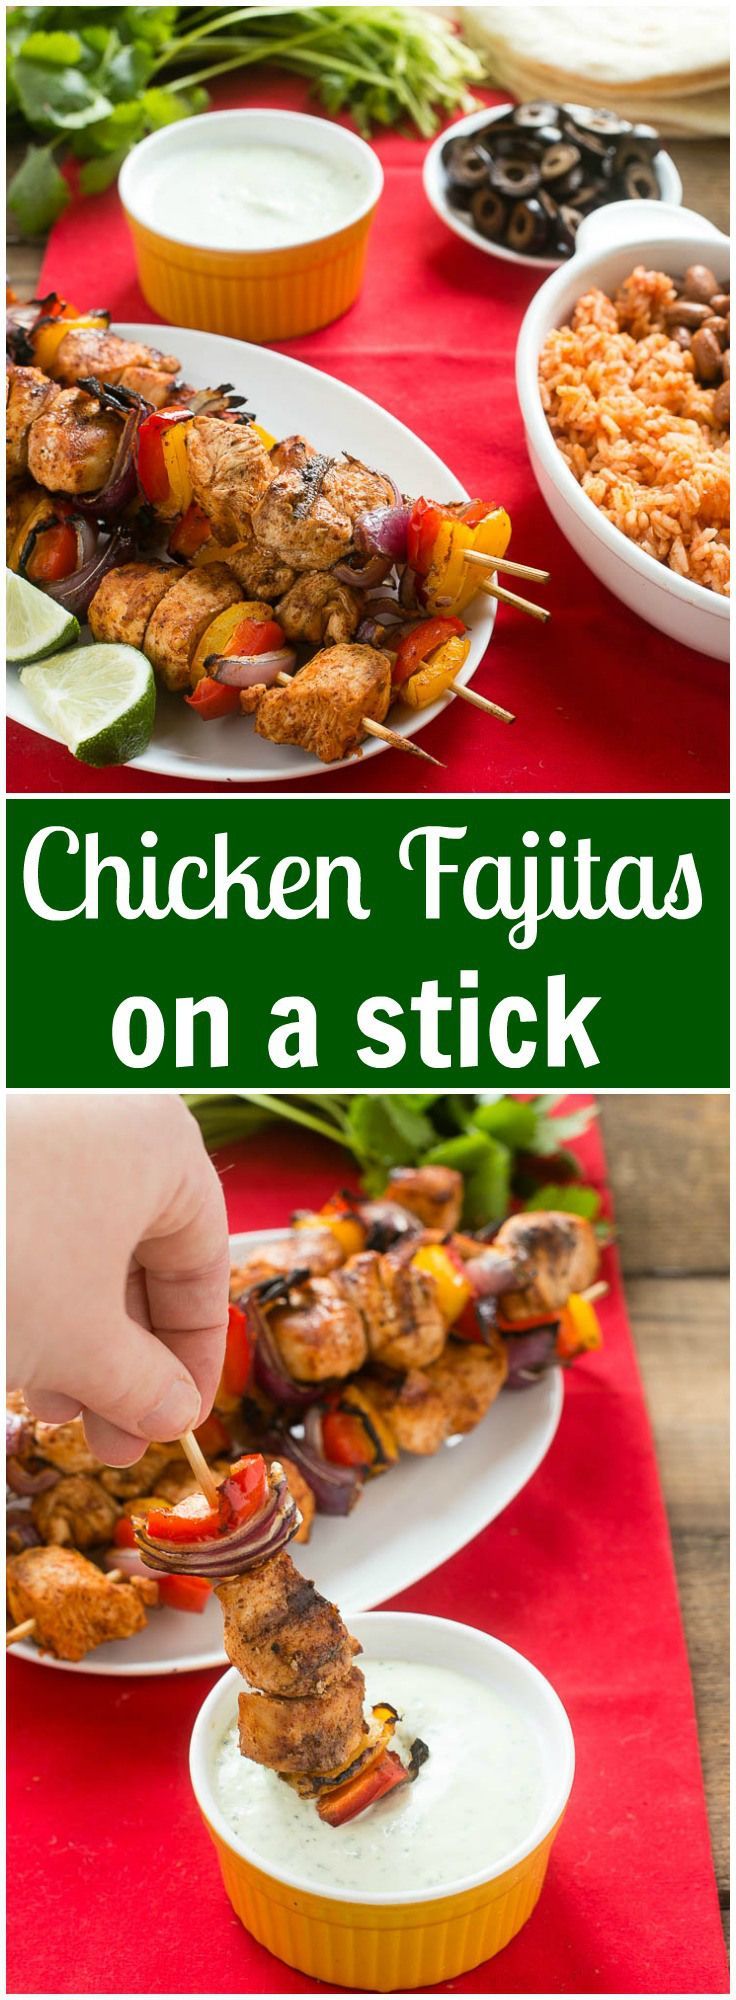 Try something a little different this Cinco de Mayo! These chicken fajitas on a stick with creamy cilantro dipping sauce make a